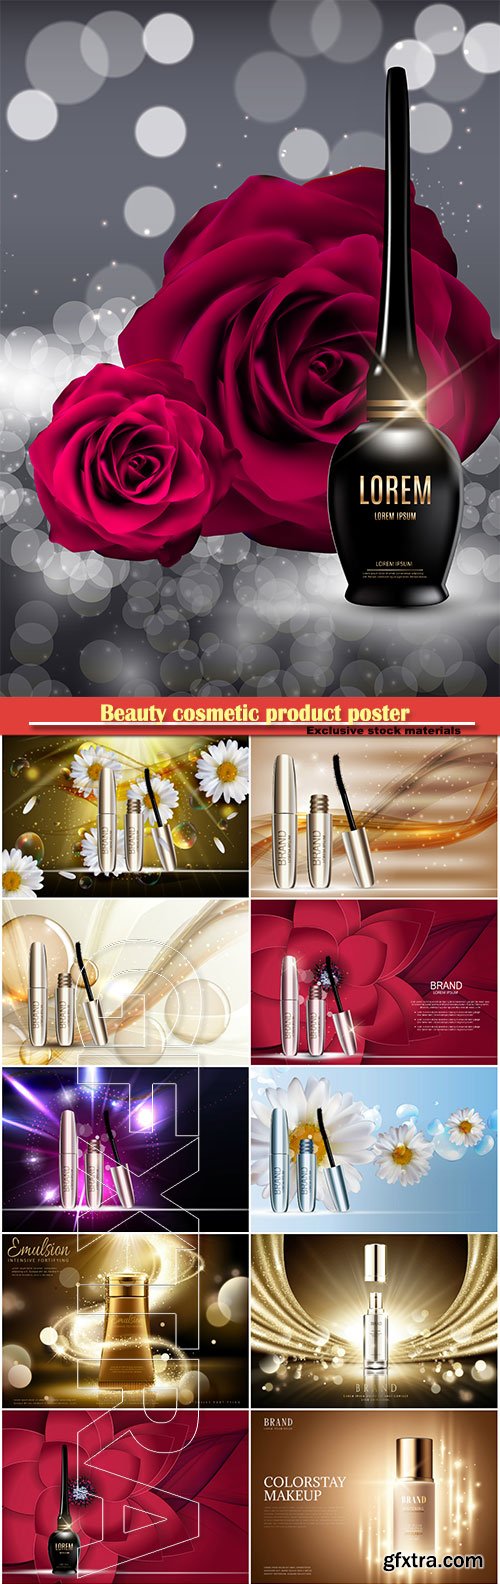 Beauty cosmetic product poster, fashion design makeup cosmetics, background in 3d illustration